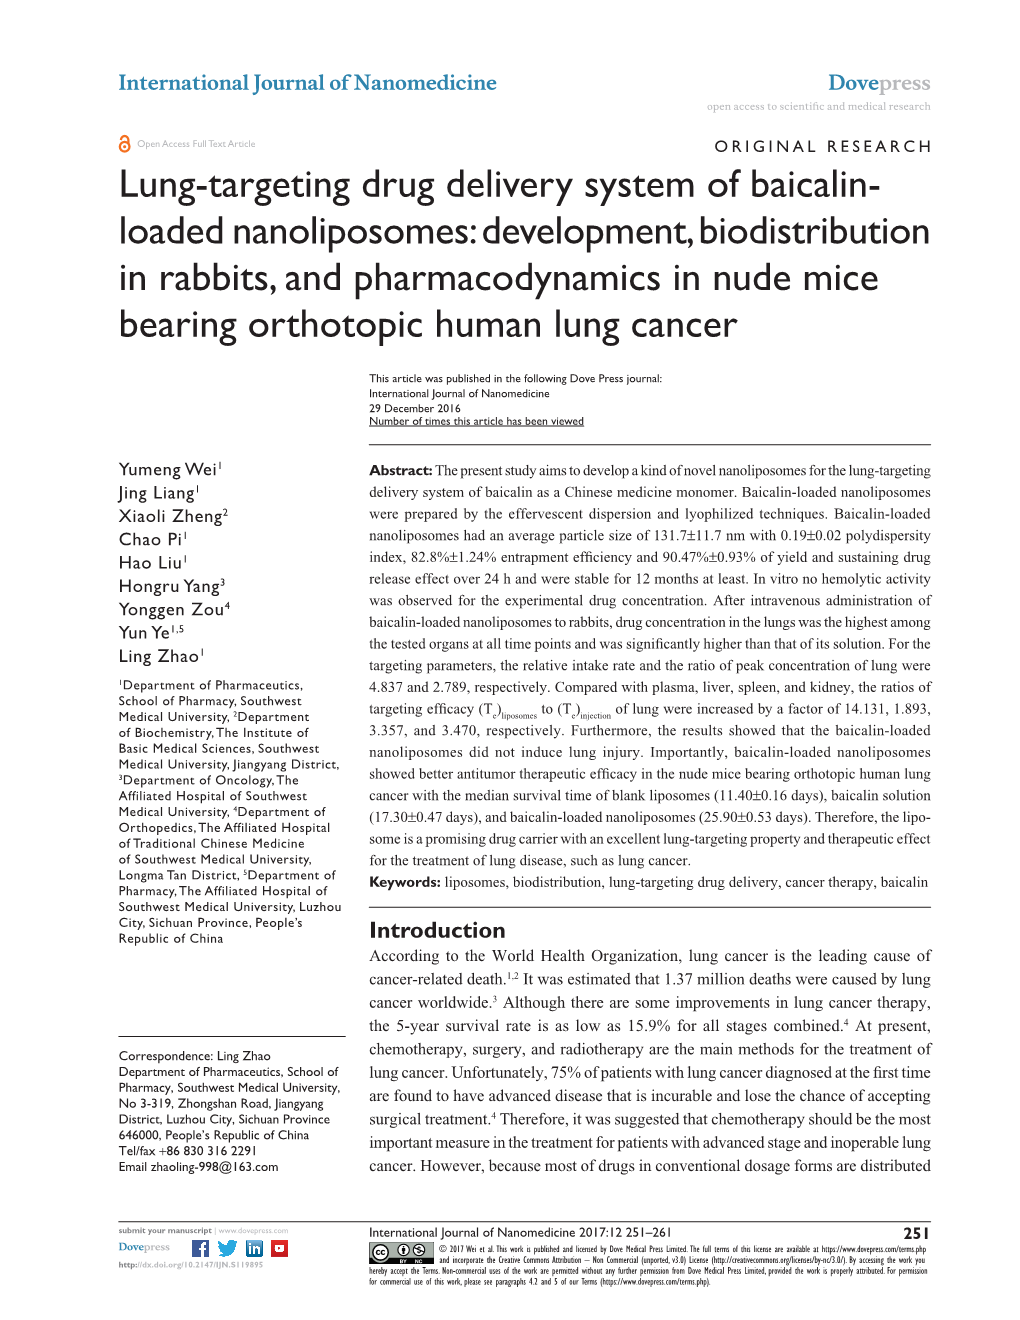 Lung-Targeting Drug Delivery System of Baicalin- Loaded